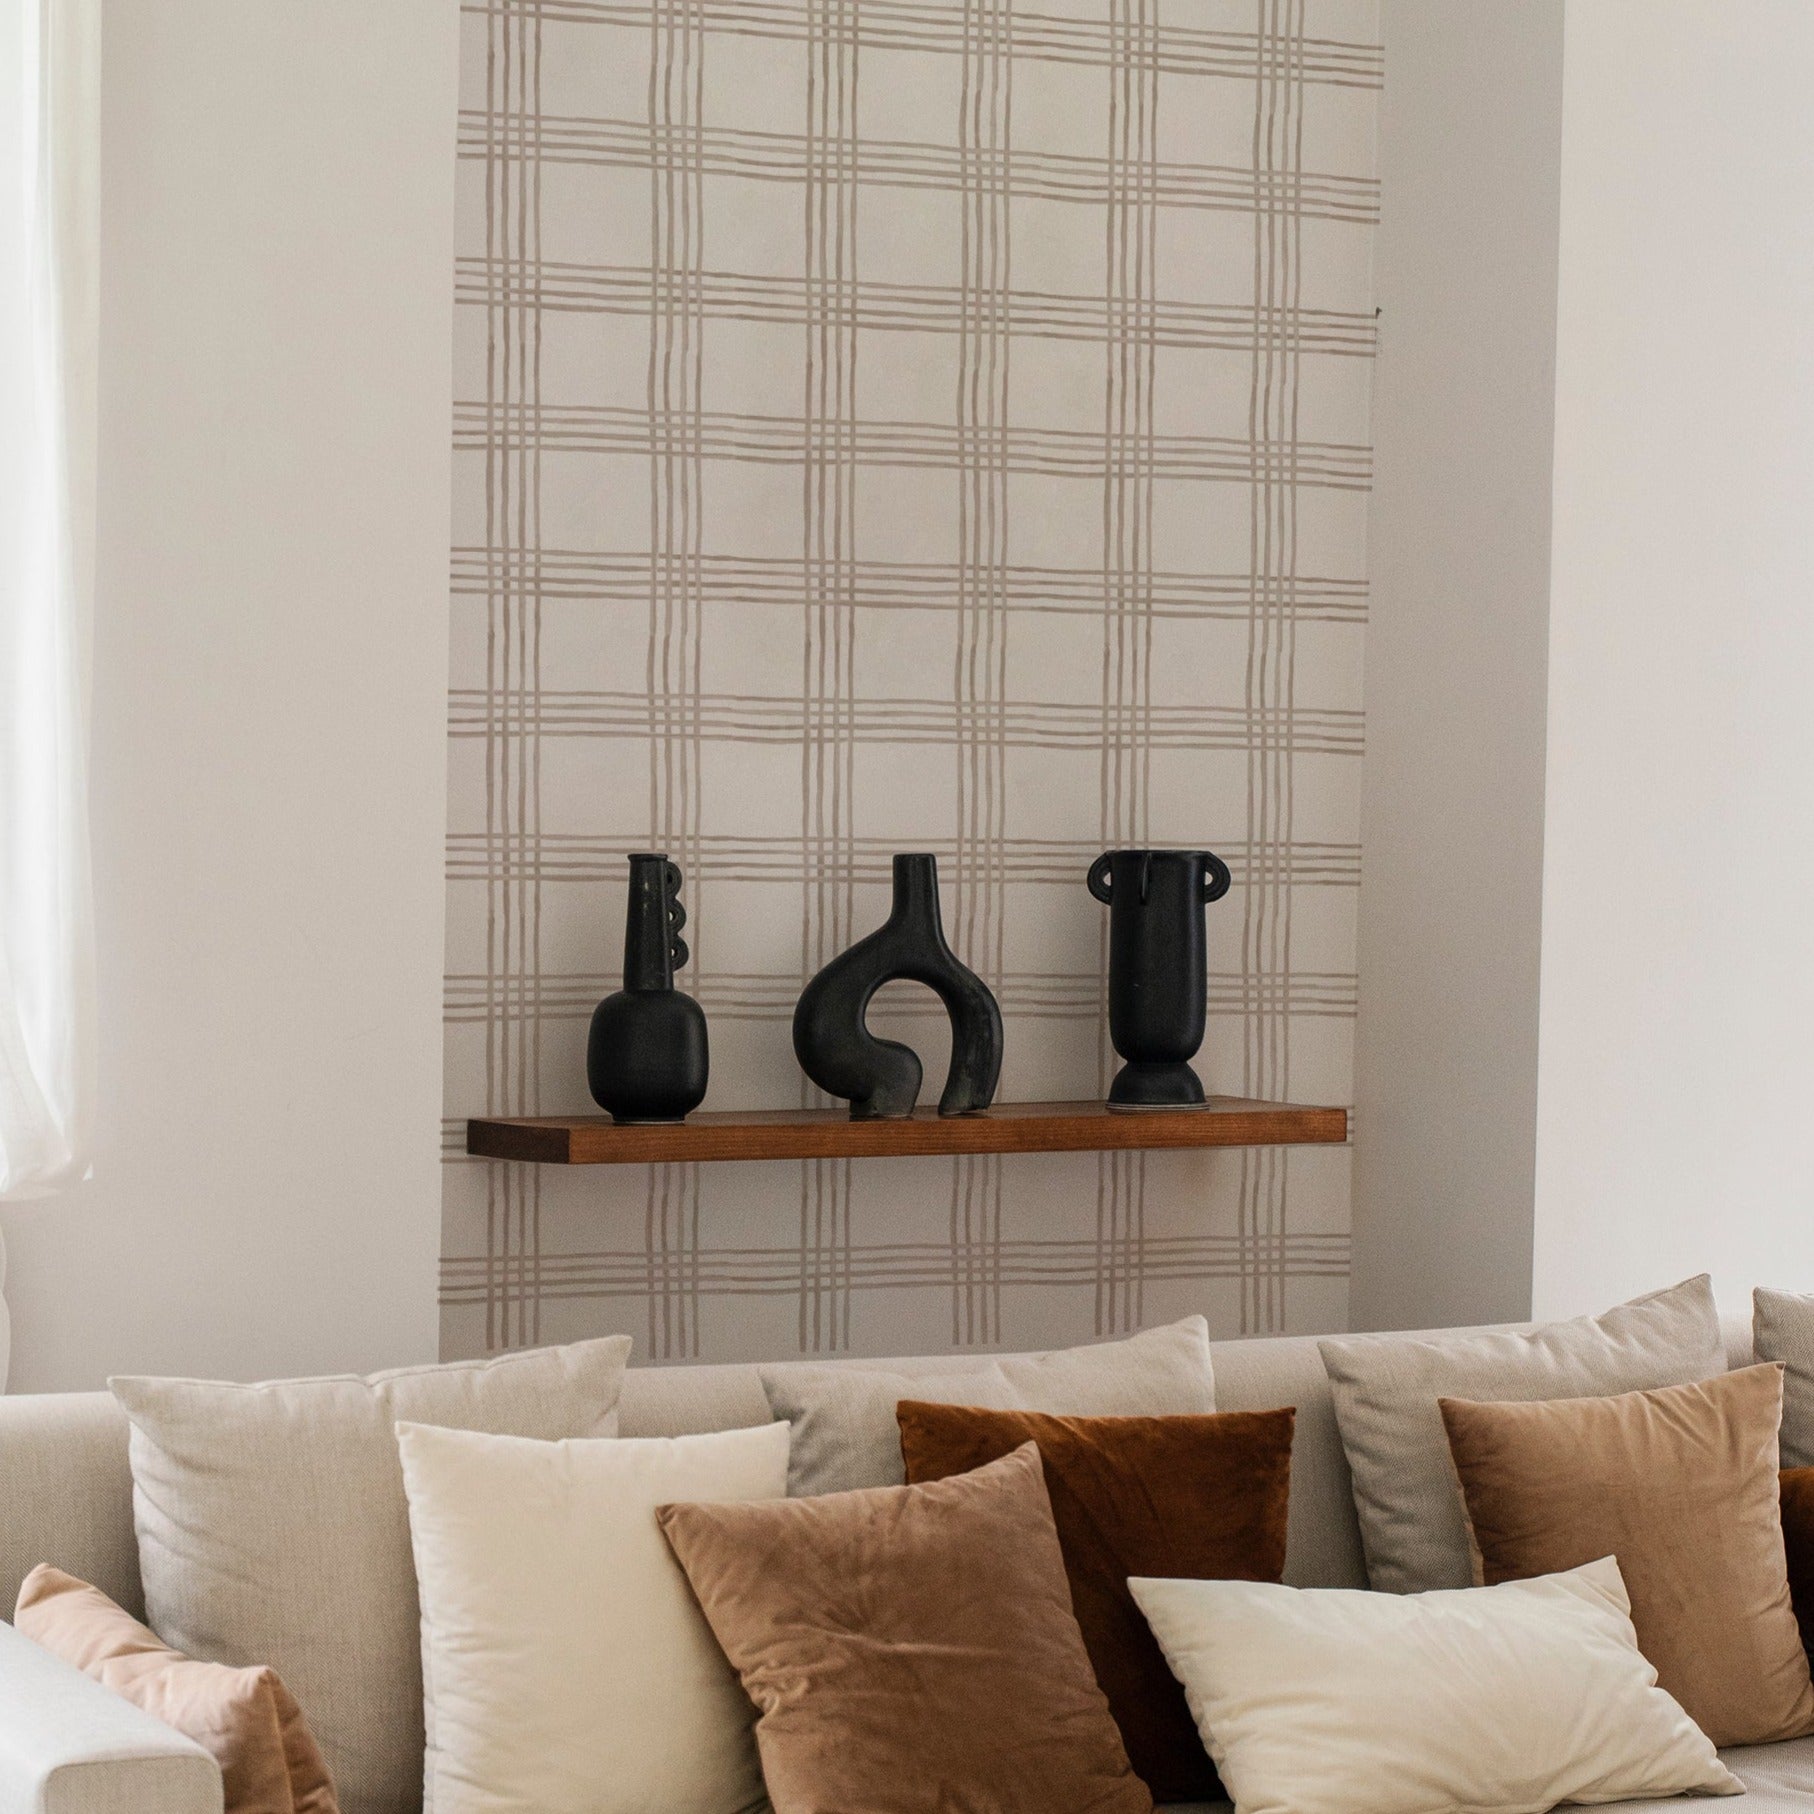 An elegant living room scene featuring the Big Boho Wallpaper - 123 on one wall. The wallpaper’s grid pattern in beige on a white background complements a cozy sofa filled with pillows in earthy tones and a wooden shelf displaying unique black vases, enhancing the room's modern aesthetic